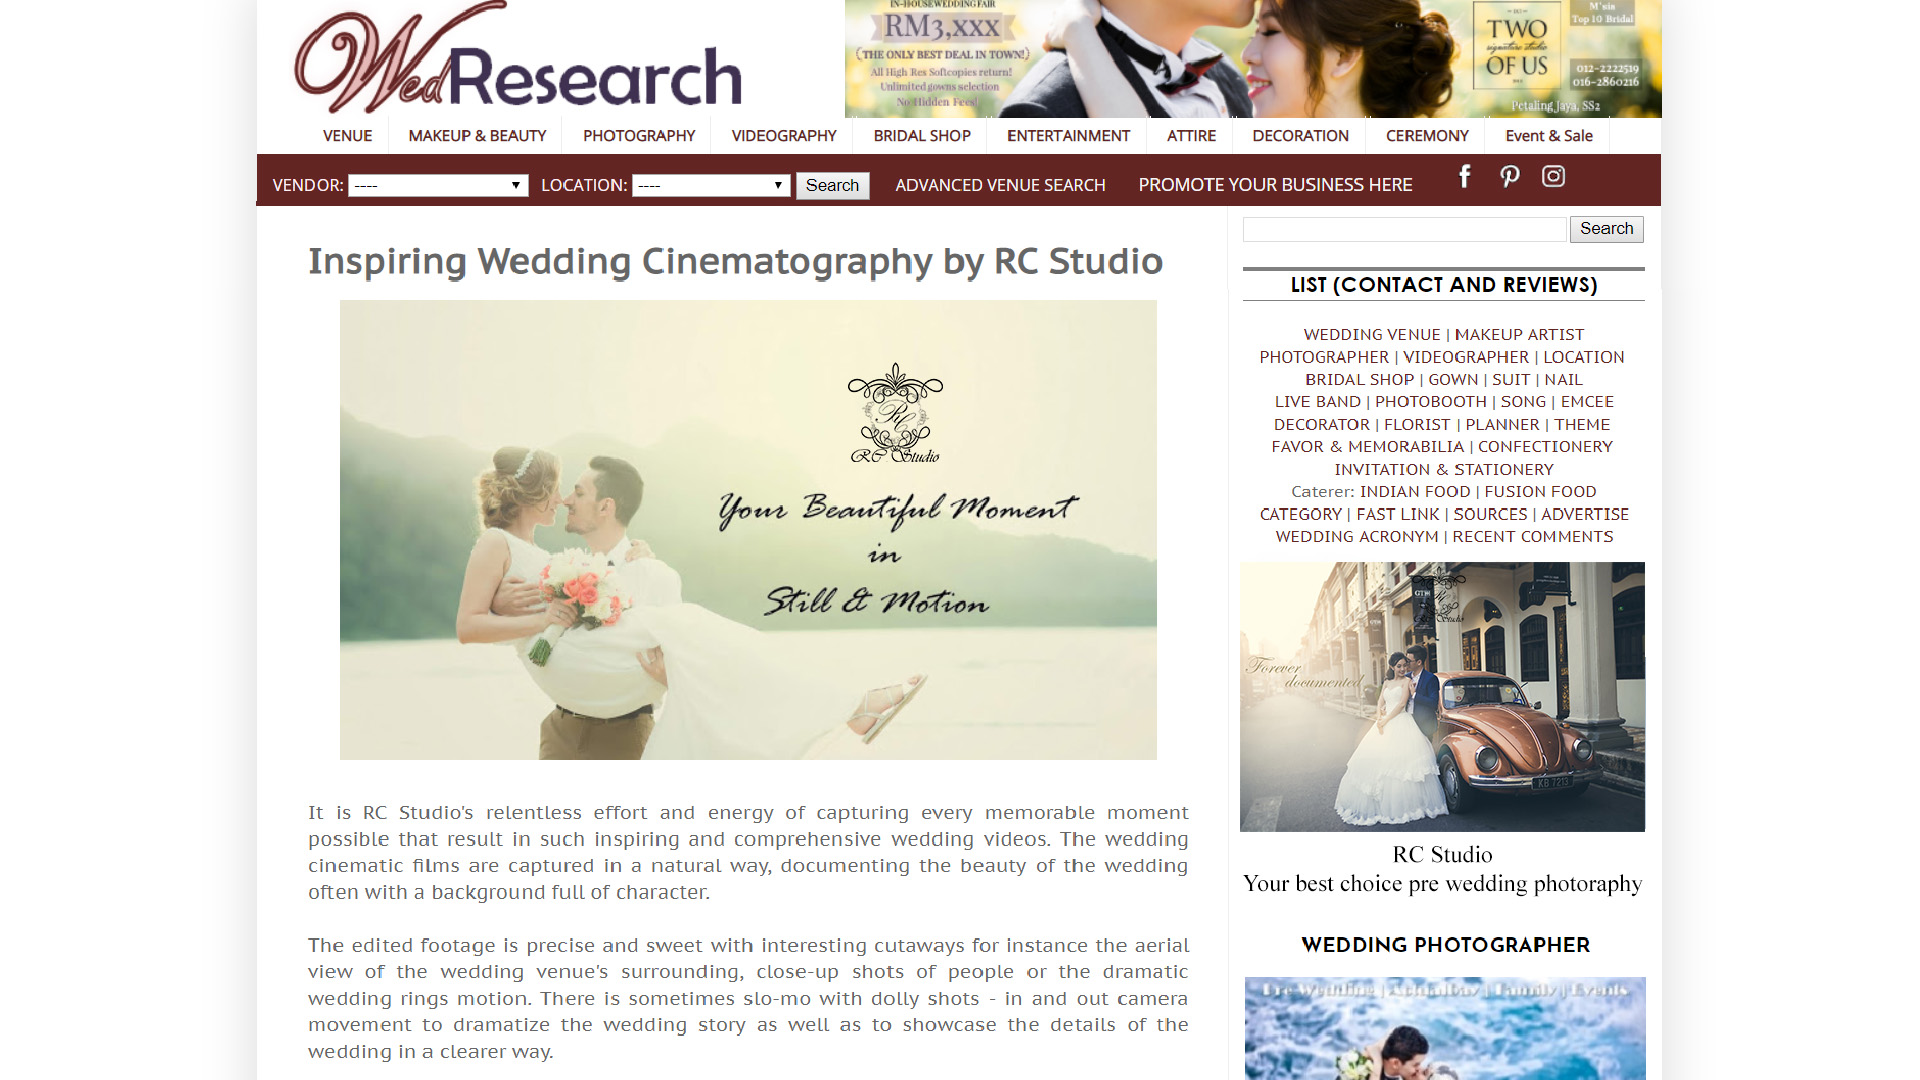 Wedsearch cover page